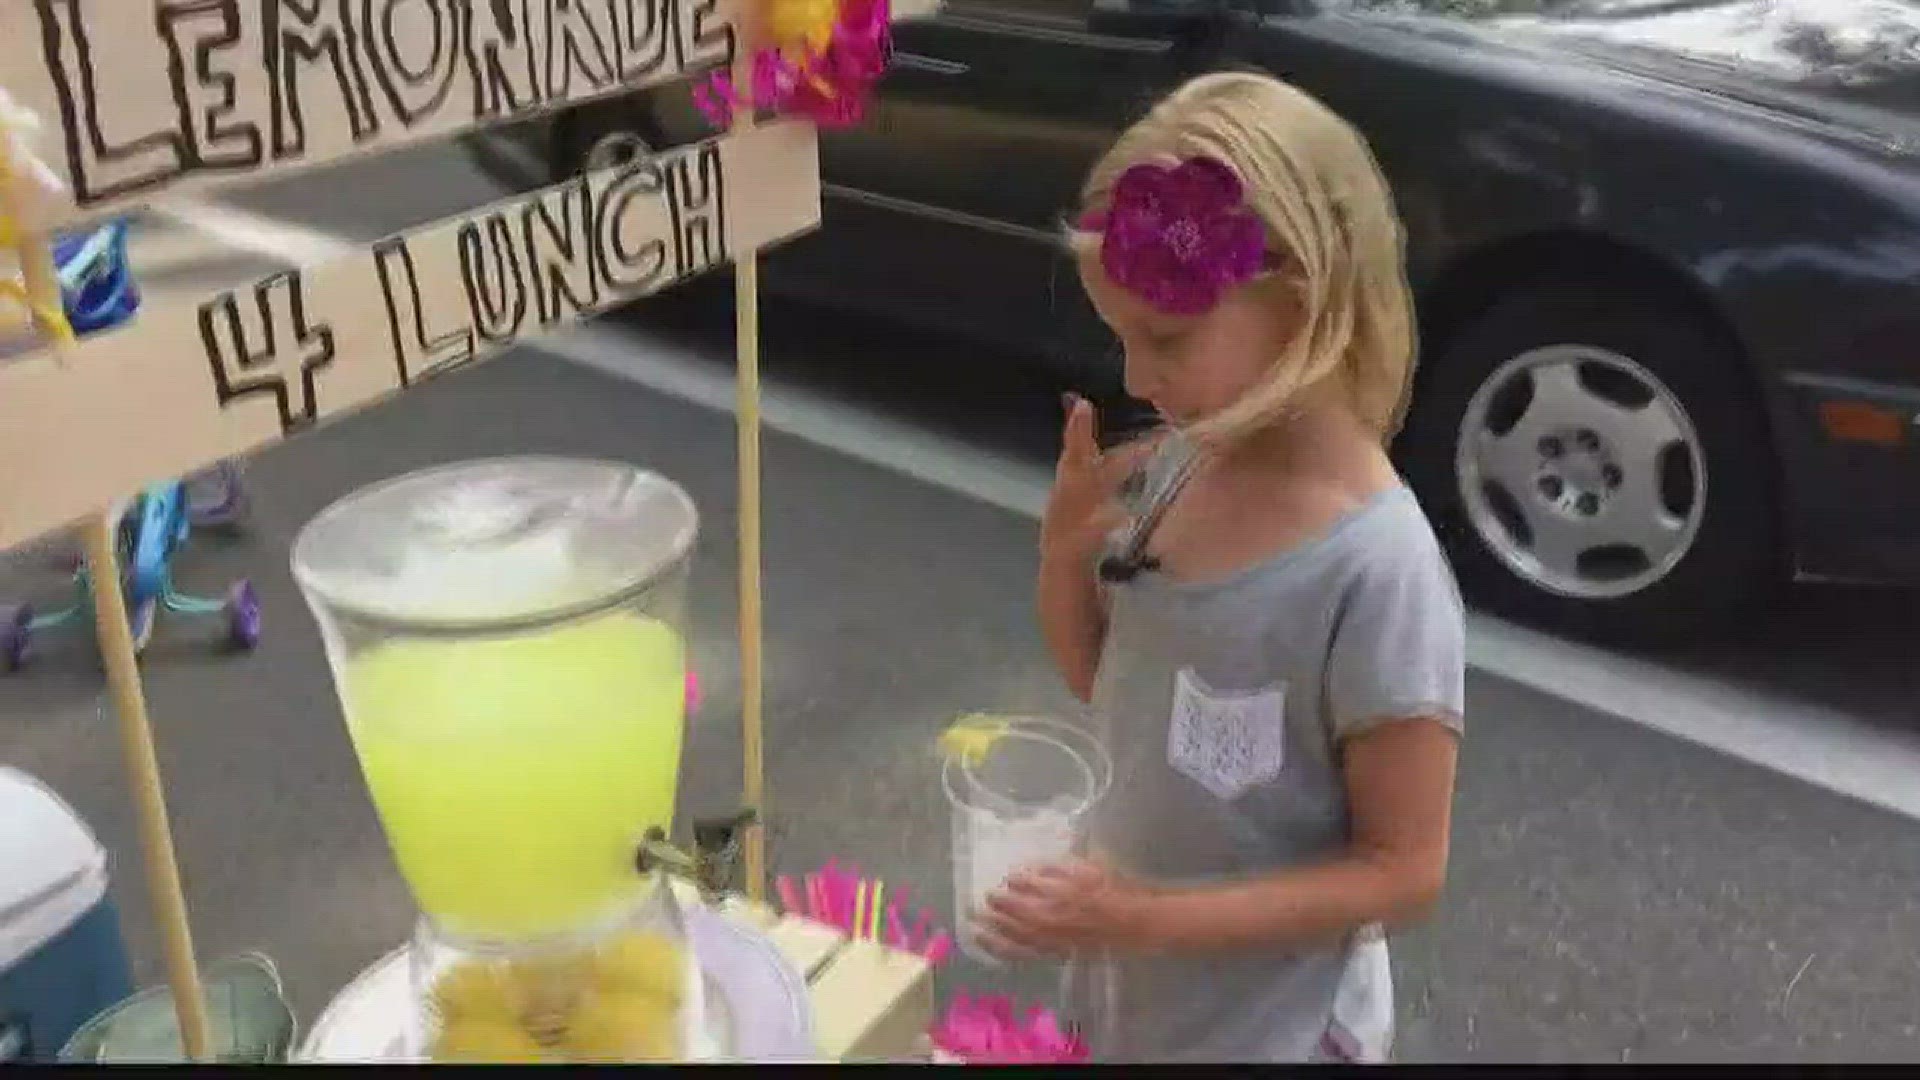 KREM 2's Dave Somers goes to a 6-year-old's lemonade stand in Coeur d'Alene because she is donating all her money to help pay off the CDA school lunch debt.